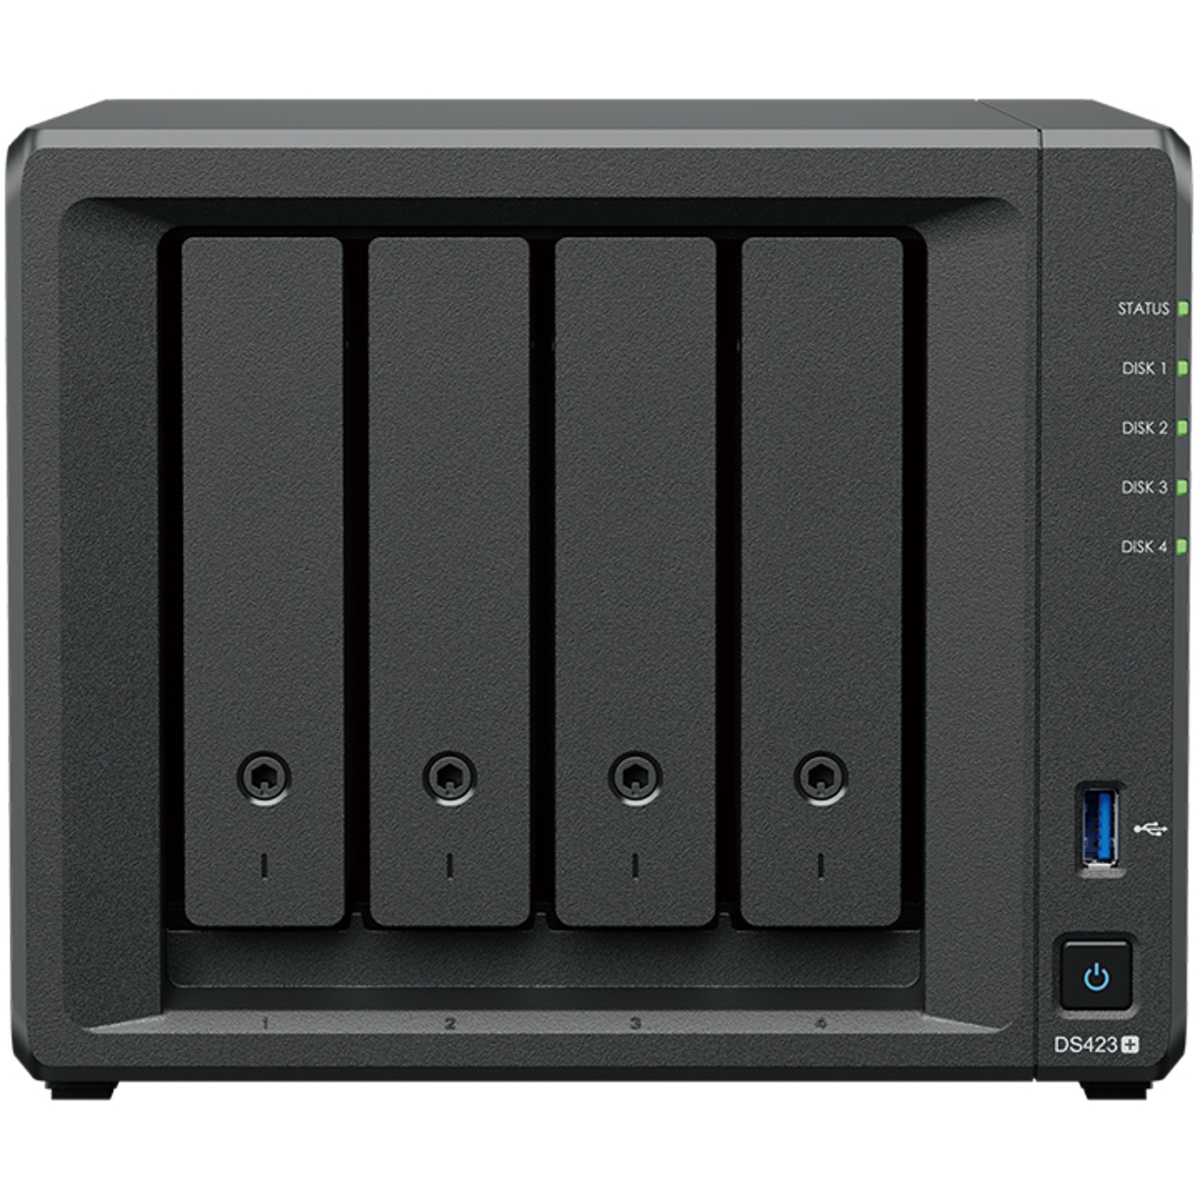 Synology DiskStation DS423+ 72tb 4-Bay Desktop Multimedia / Power User / Business NAS - Network Attached Storage Device 3x24tb Seagate EXOS X24 ST24000NM002H 3.5 7200rpm SATA 6Gb/s HDD ENTERPRISE Class Drives Installed - Burn-In Tested - FREE RAM UPGRADE DiskStation DS423+